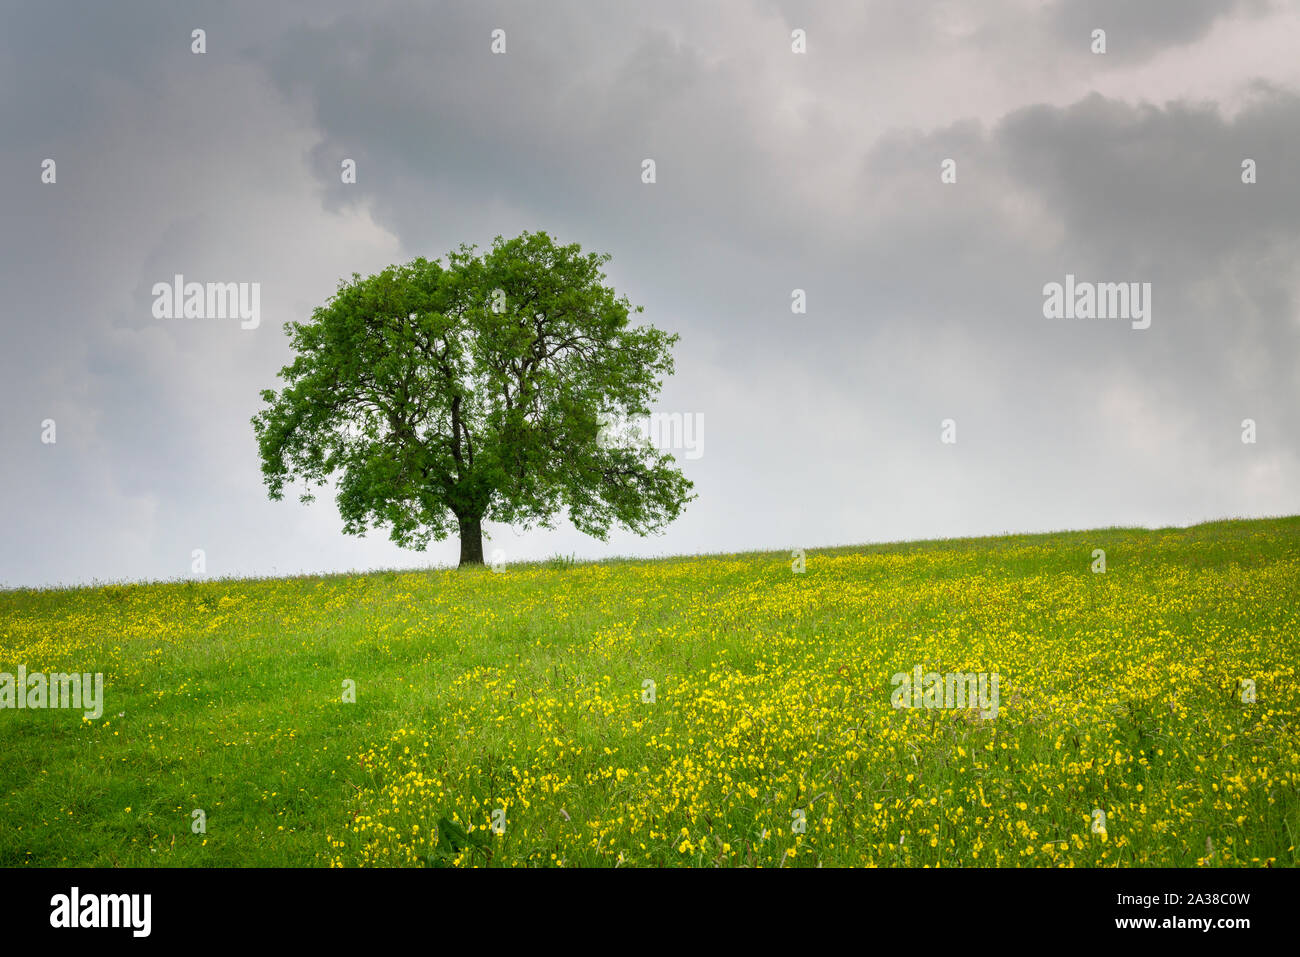 A European Ash tree (Fraxinus excelsior) in a meadow in early spring at Deerleap in in the Mendip Hills, Somerset, England. Stock Photo